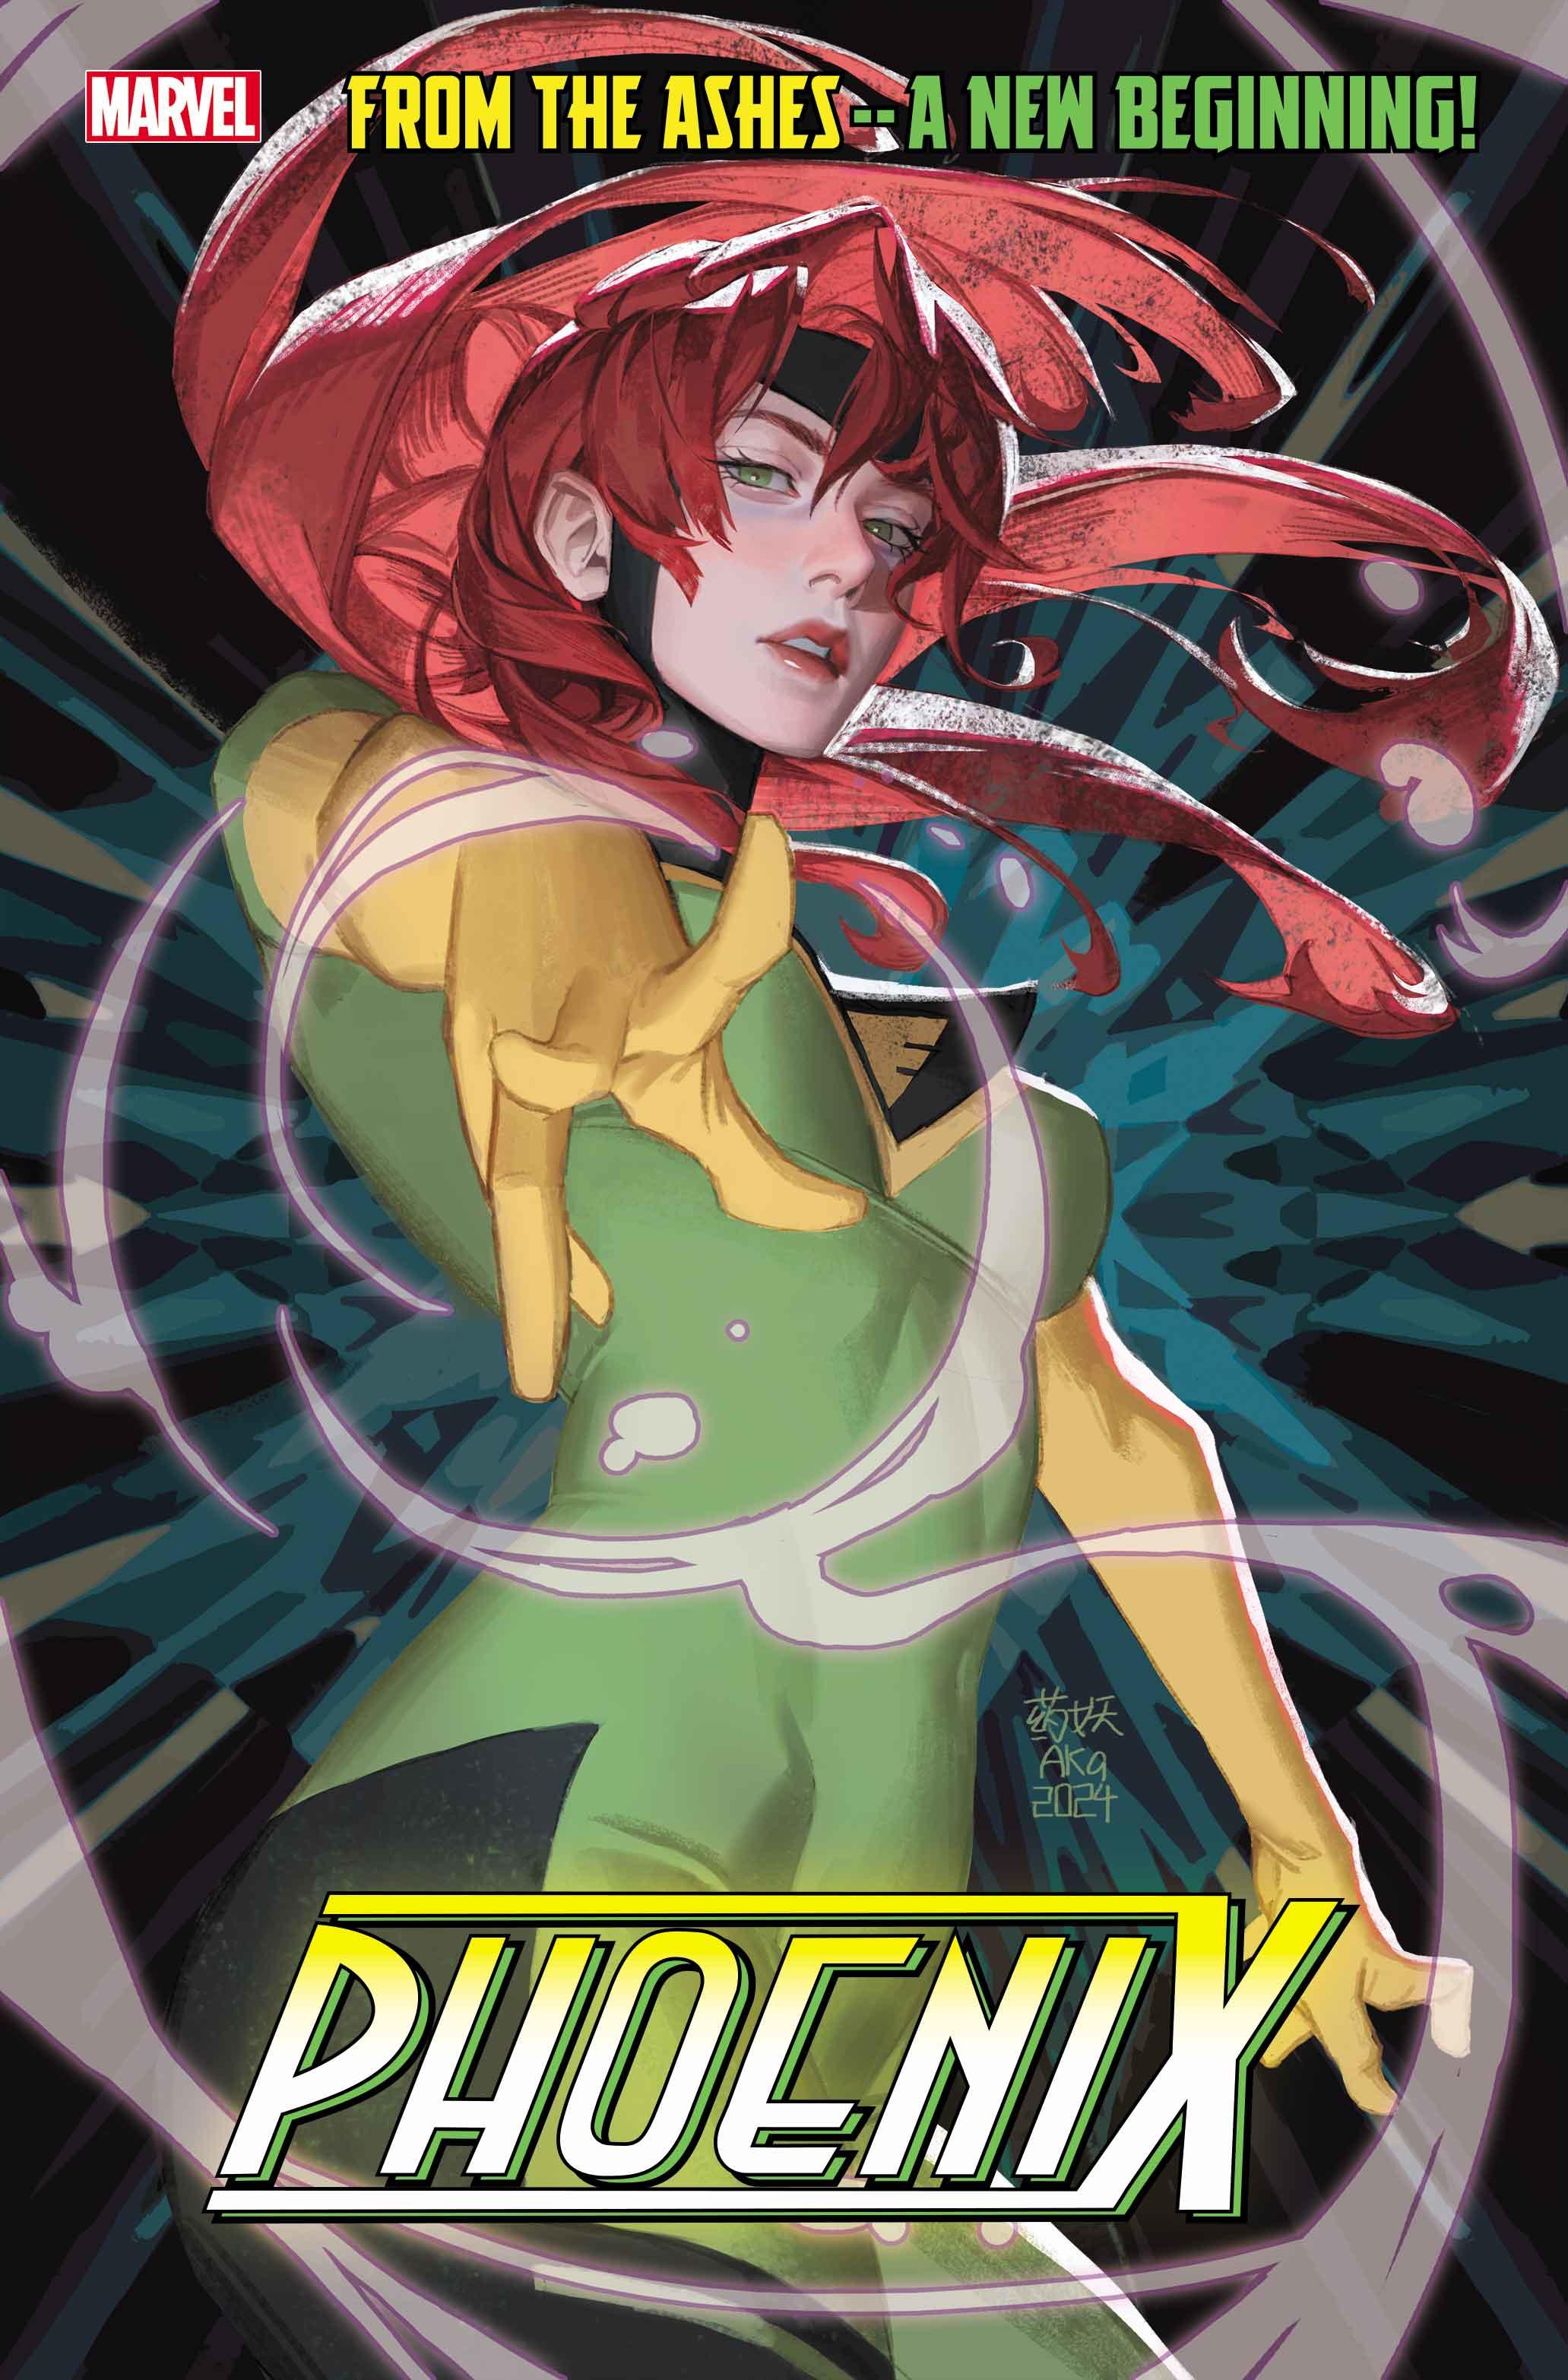 Marvel Shows Off Jean Grey's New Phoenix Costume on Variant Covers